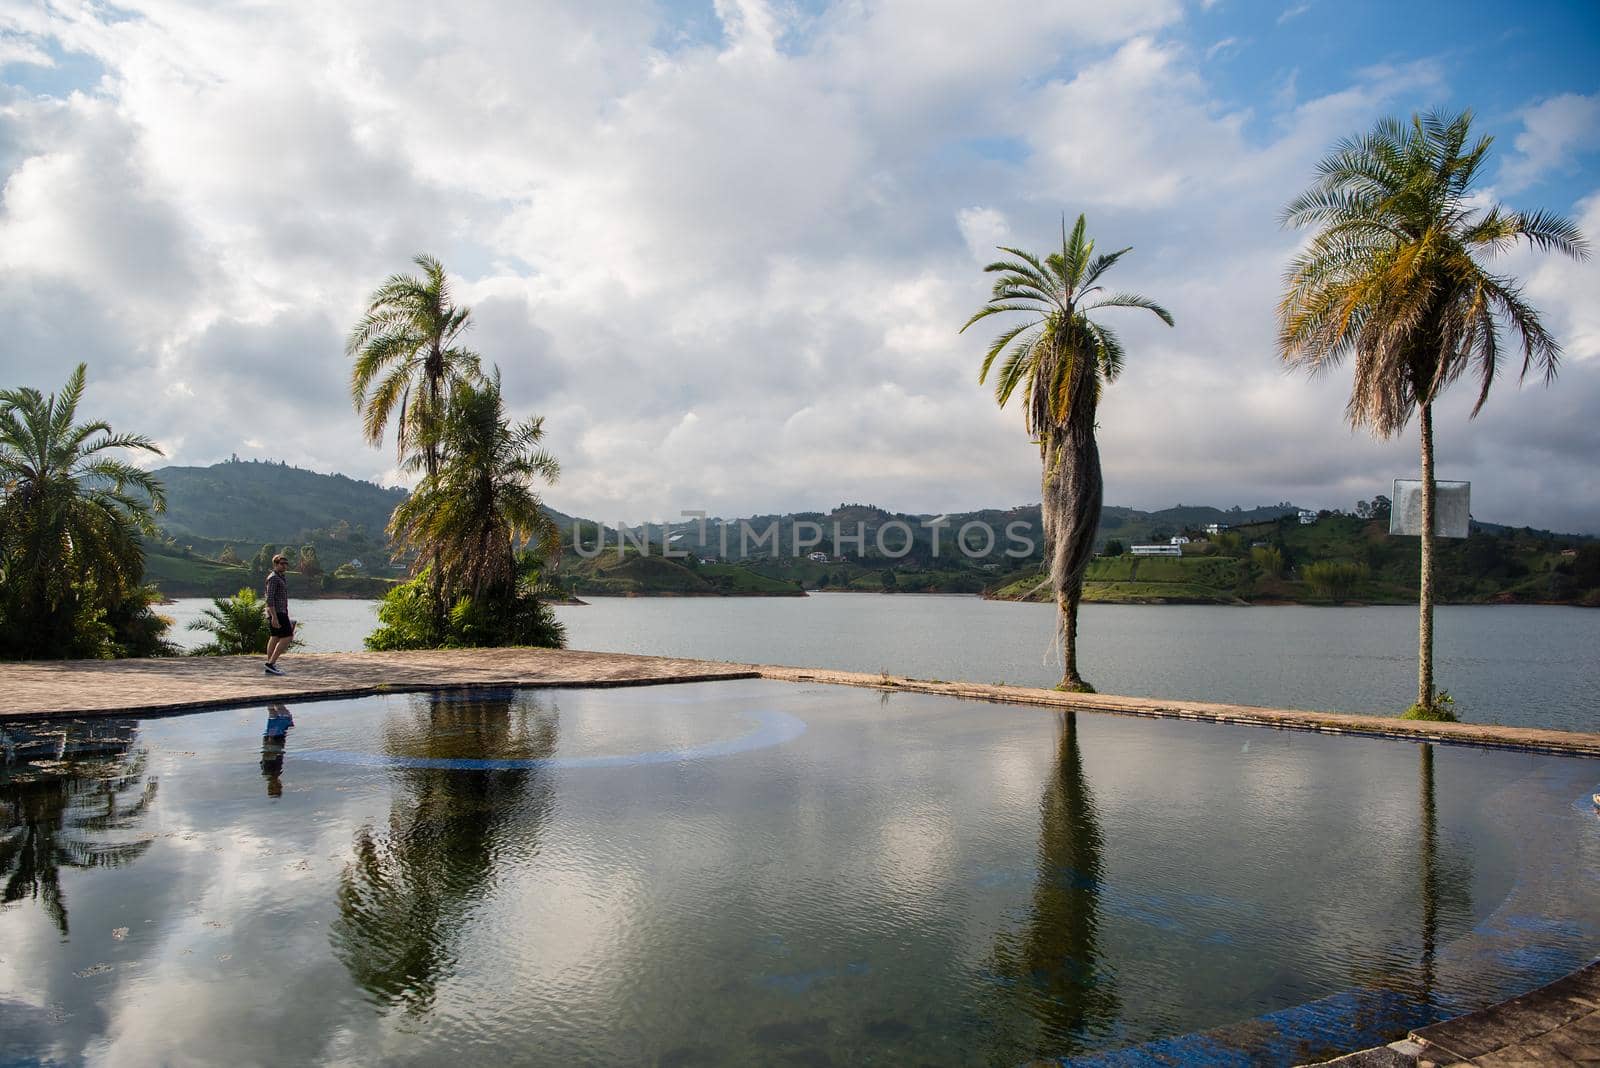 Palm trees with majestic reflection in water.